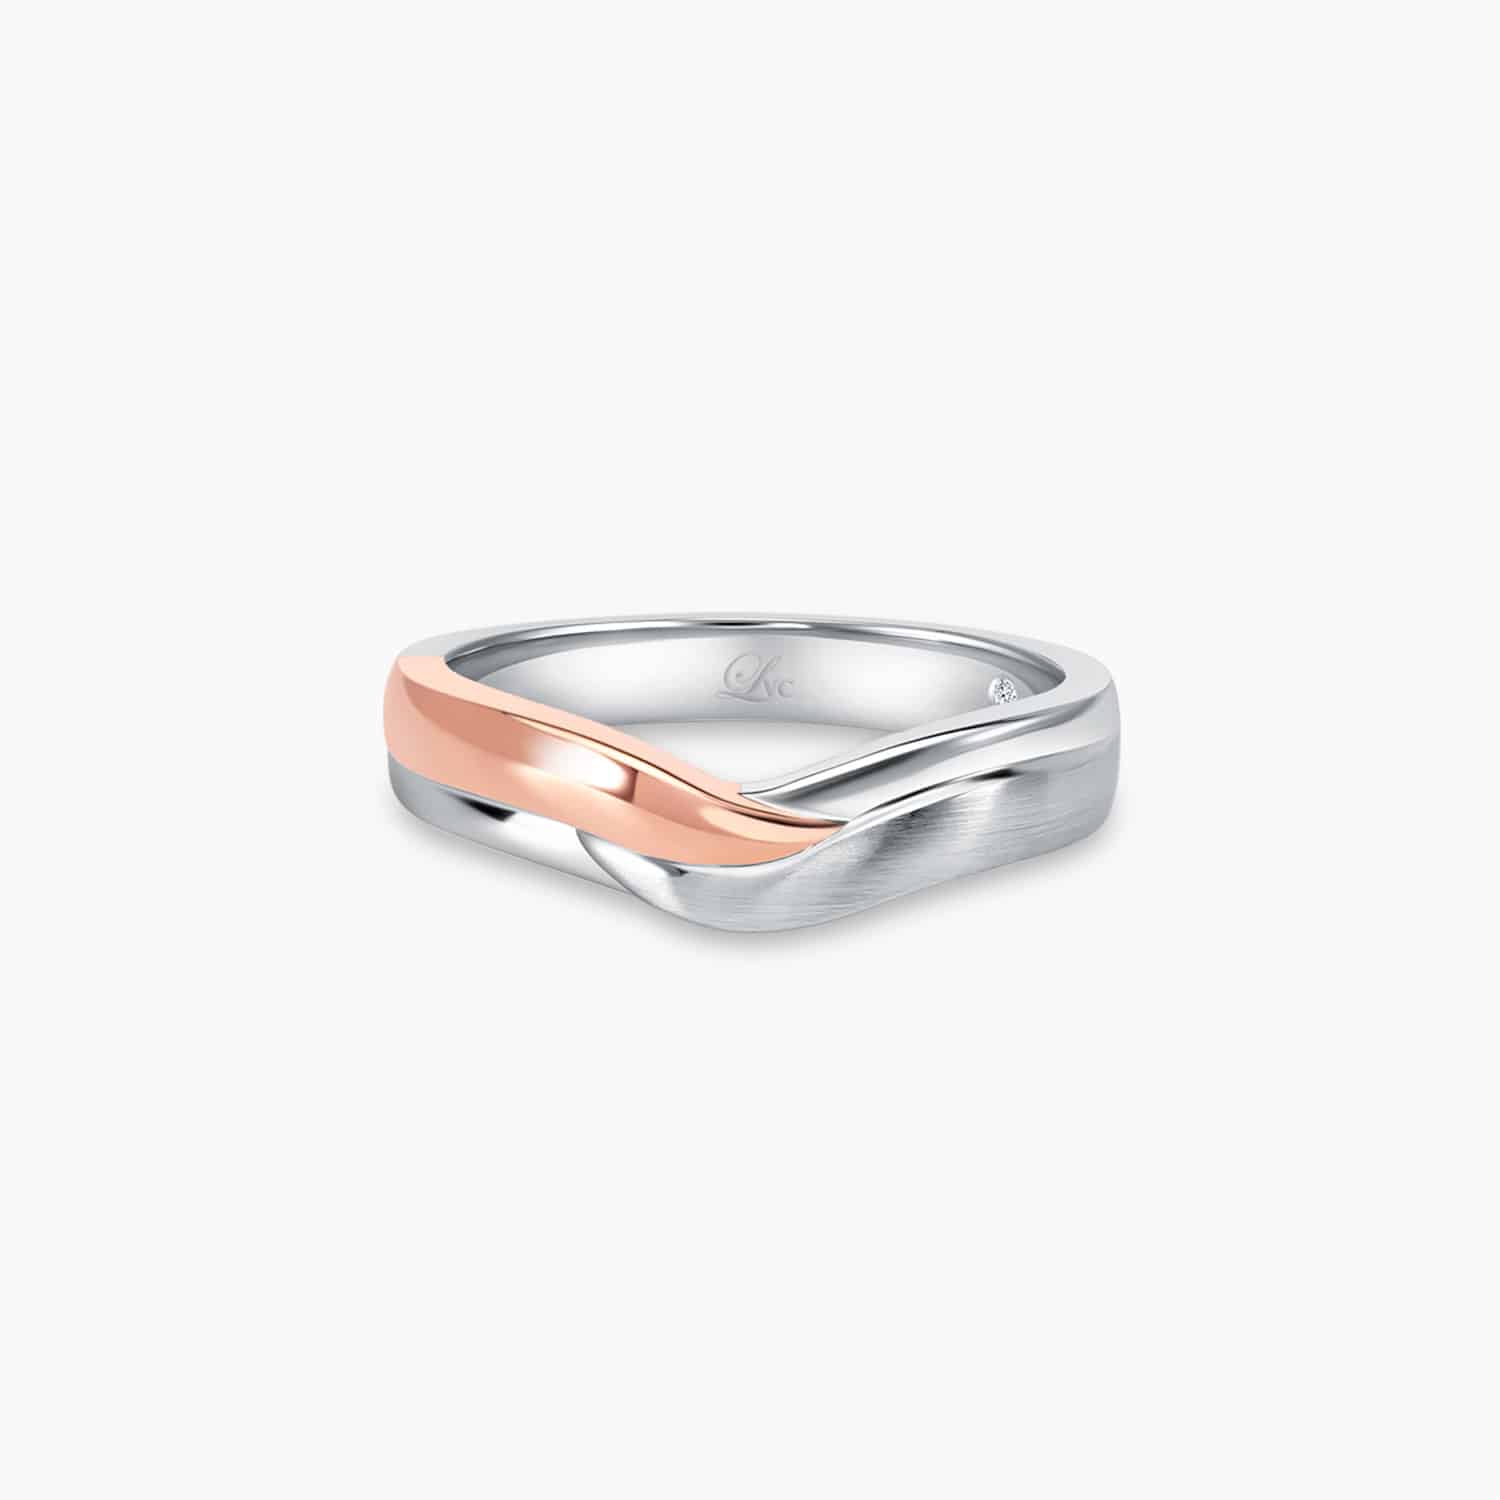 LVC PERFECTION HOPE WEDDING BAND IN WHITE AND ROSE GOLD WITH DIAMONDS a wedding band for men in white and rose gold with 1 diamond 钻石 戒指 cincin diamond